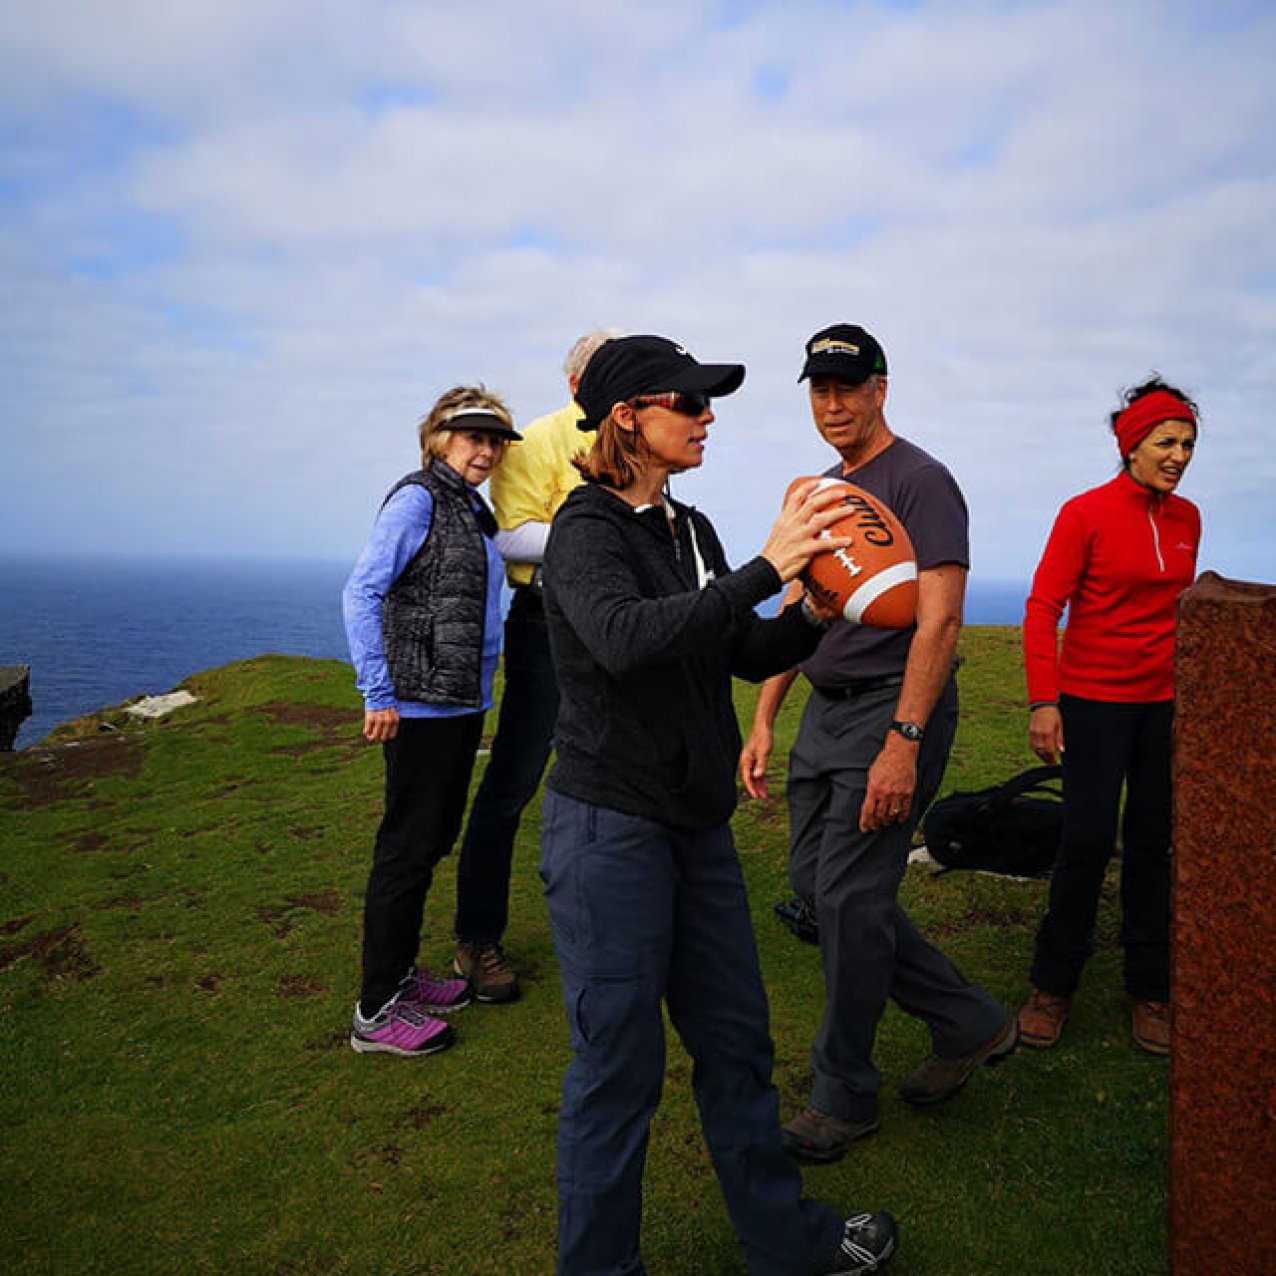 A group of guests on Bray Head with a woman at the front getting ready to throw an American football